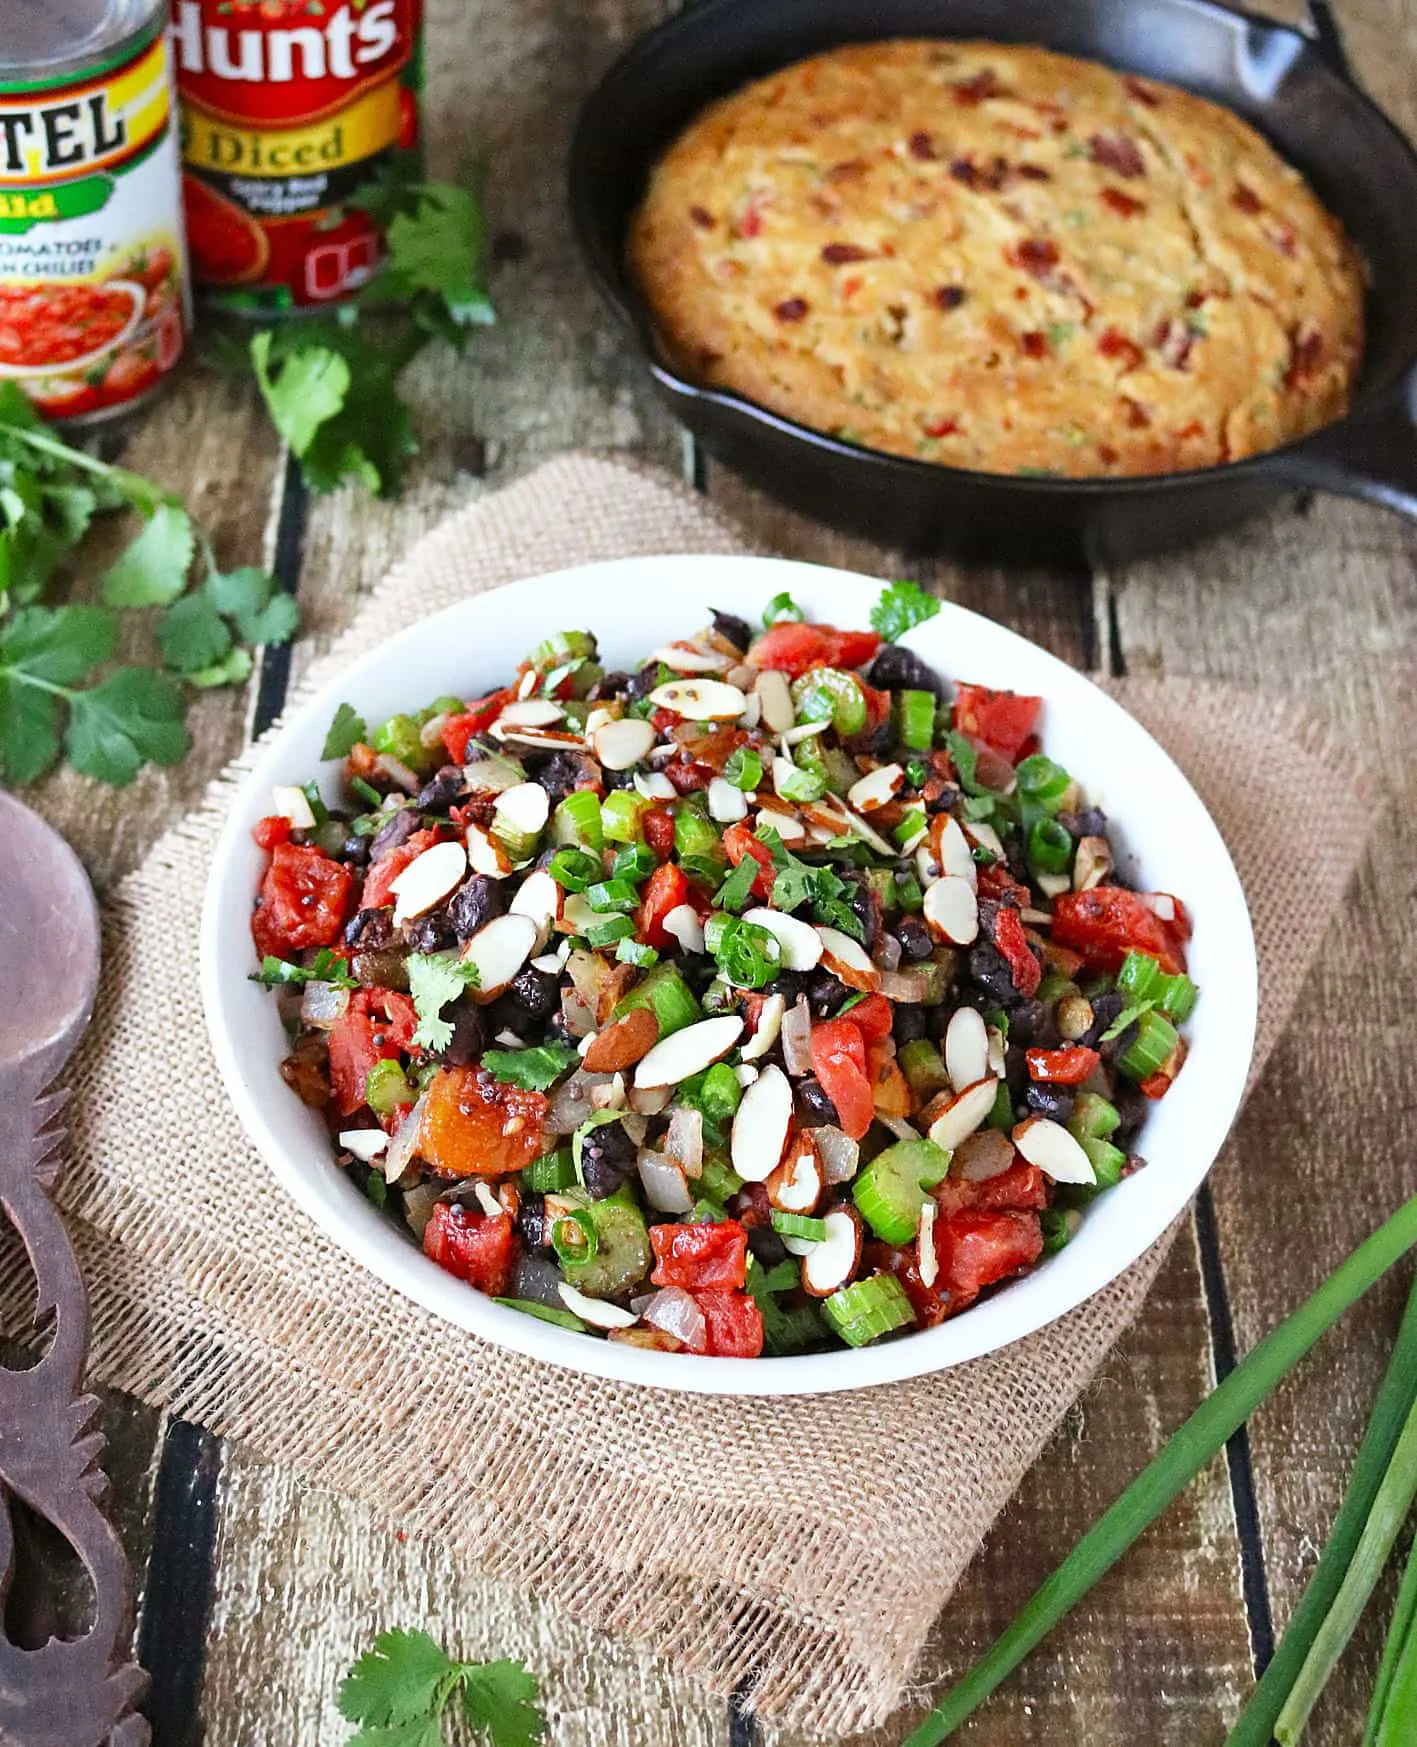 Celery Bean Tomato Sald is the perfect accompaniment to Tomato Bacon Skillet Bread - both are ready in 40 minutes! 